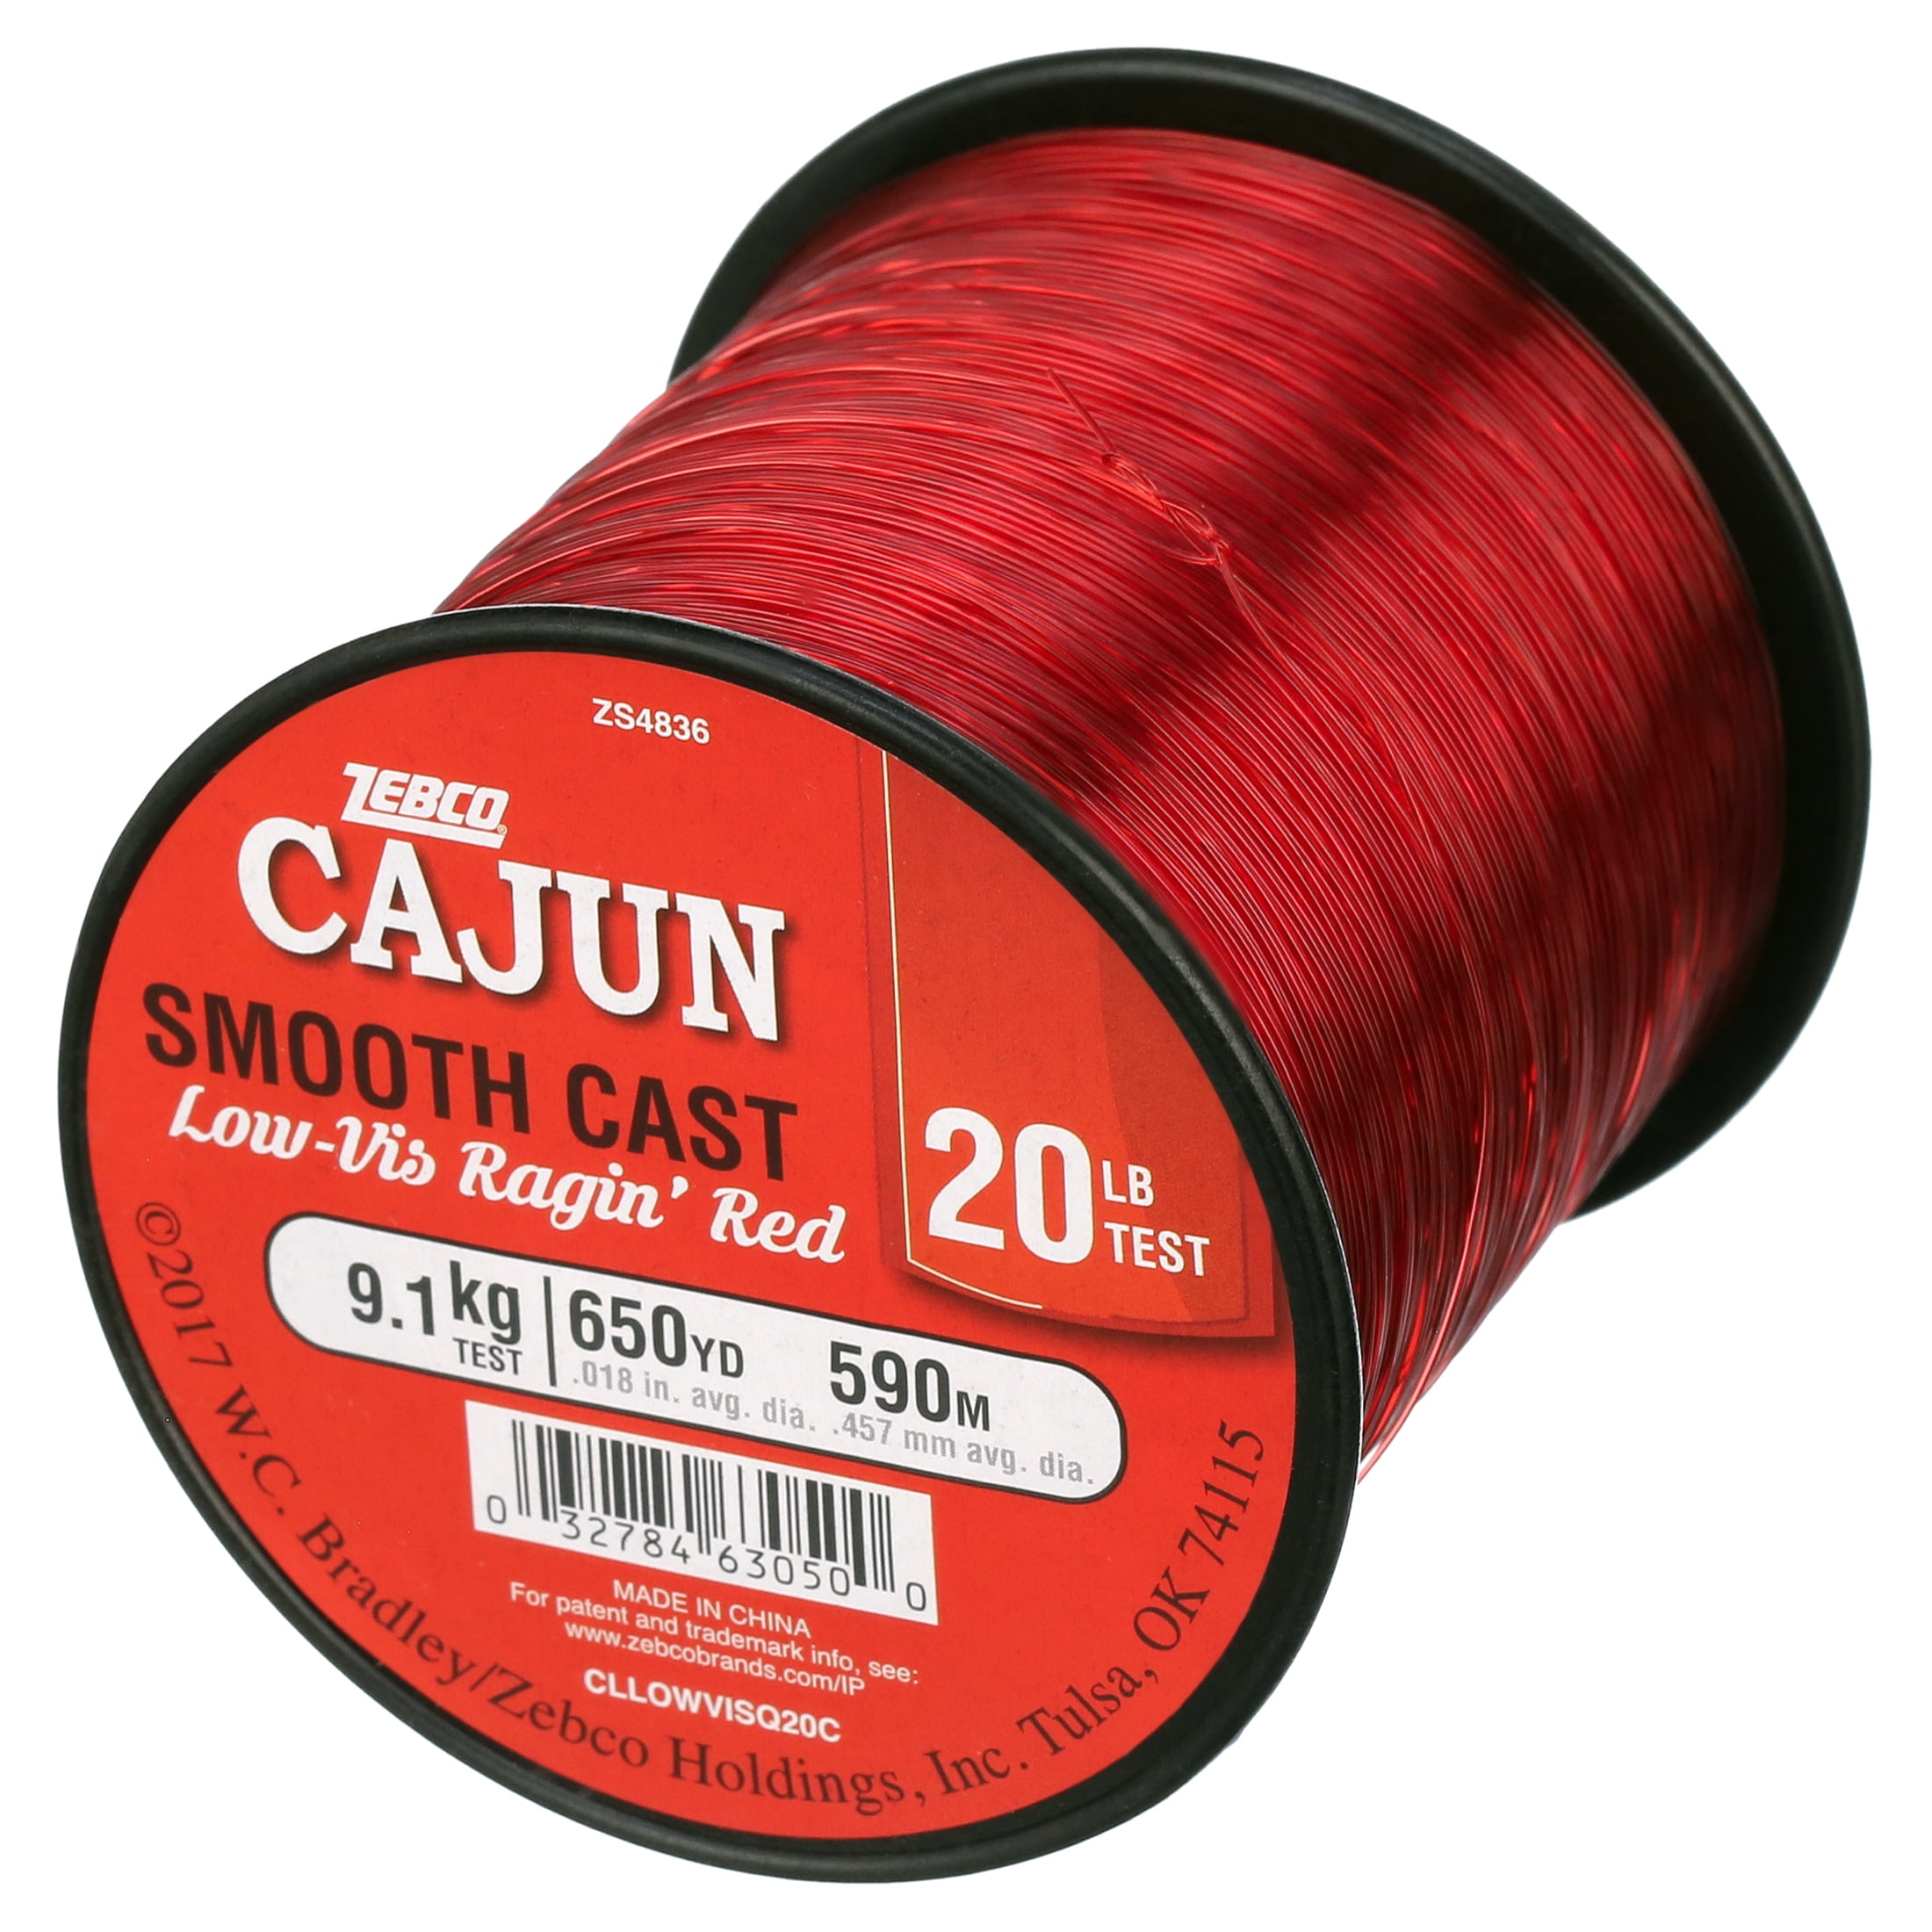 Zebco Cajun Line Smooth Cast Fishing Line, Low Vis Ragin' Red, 20-Pound  Tested